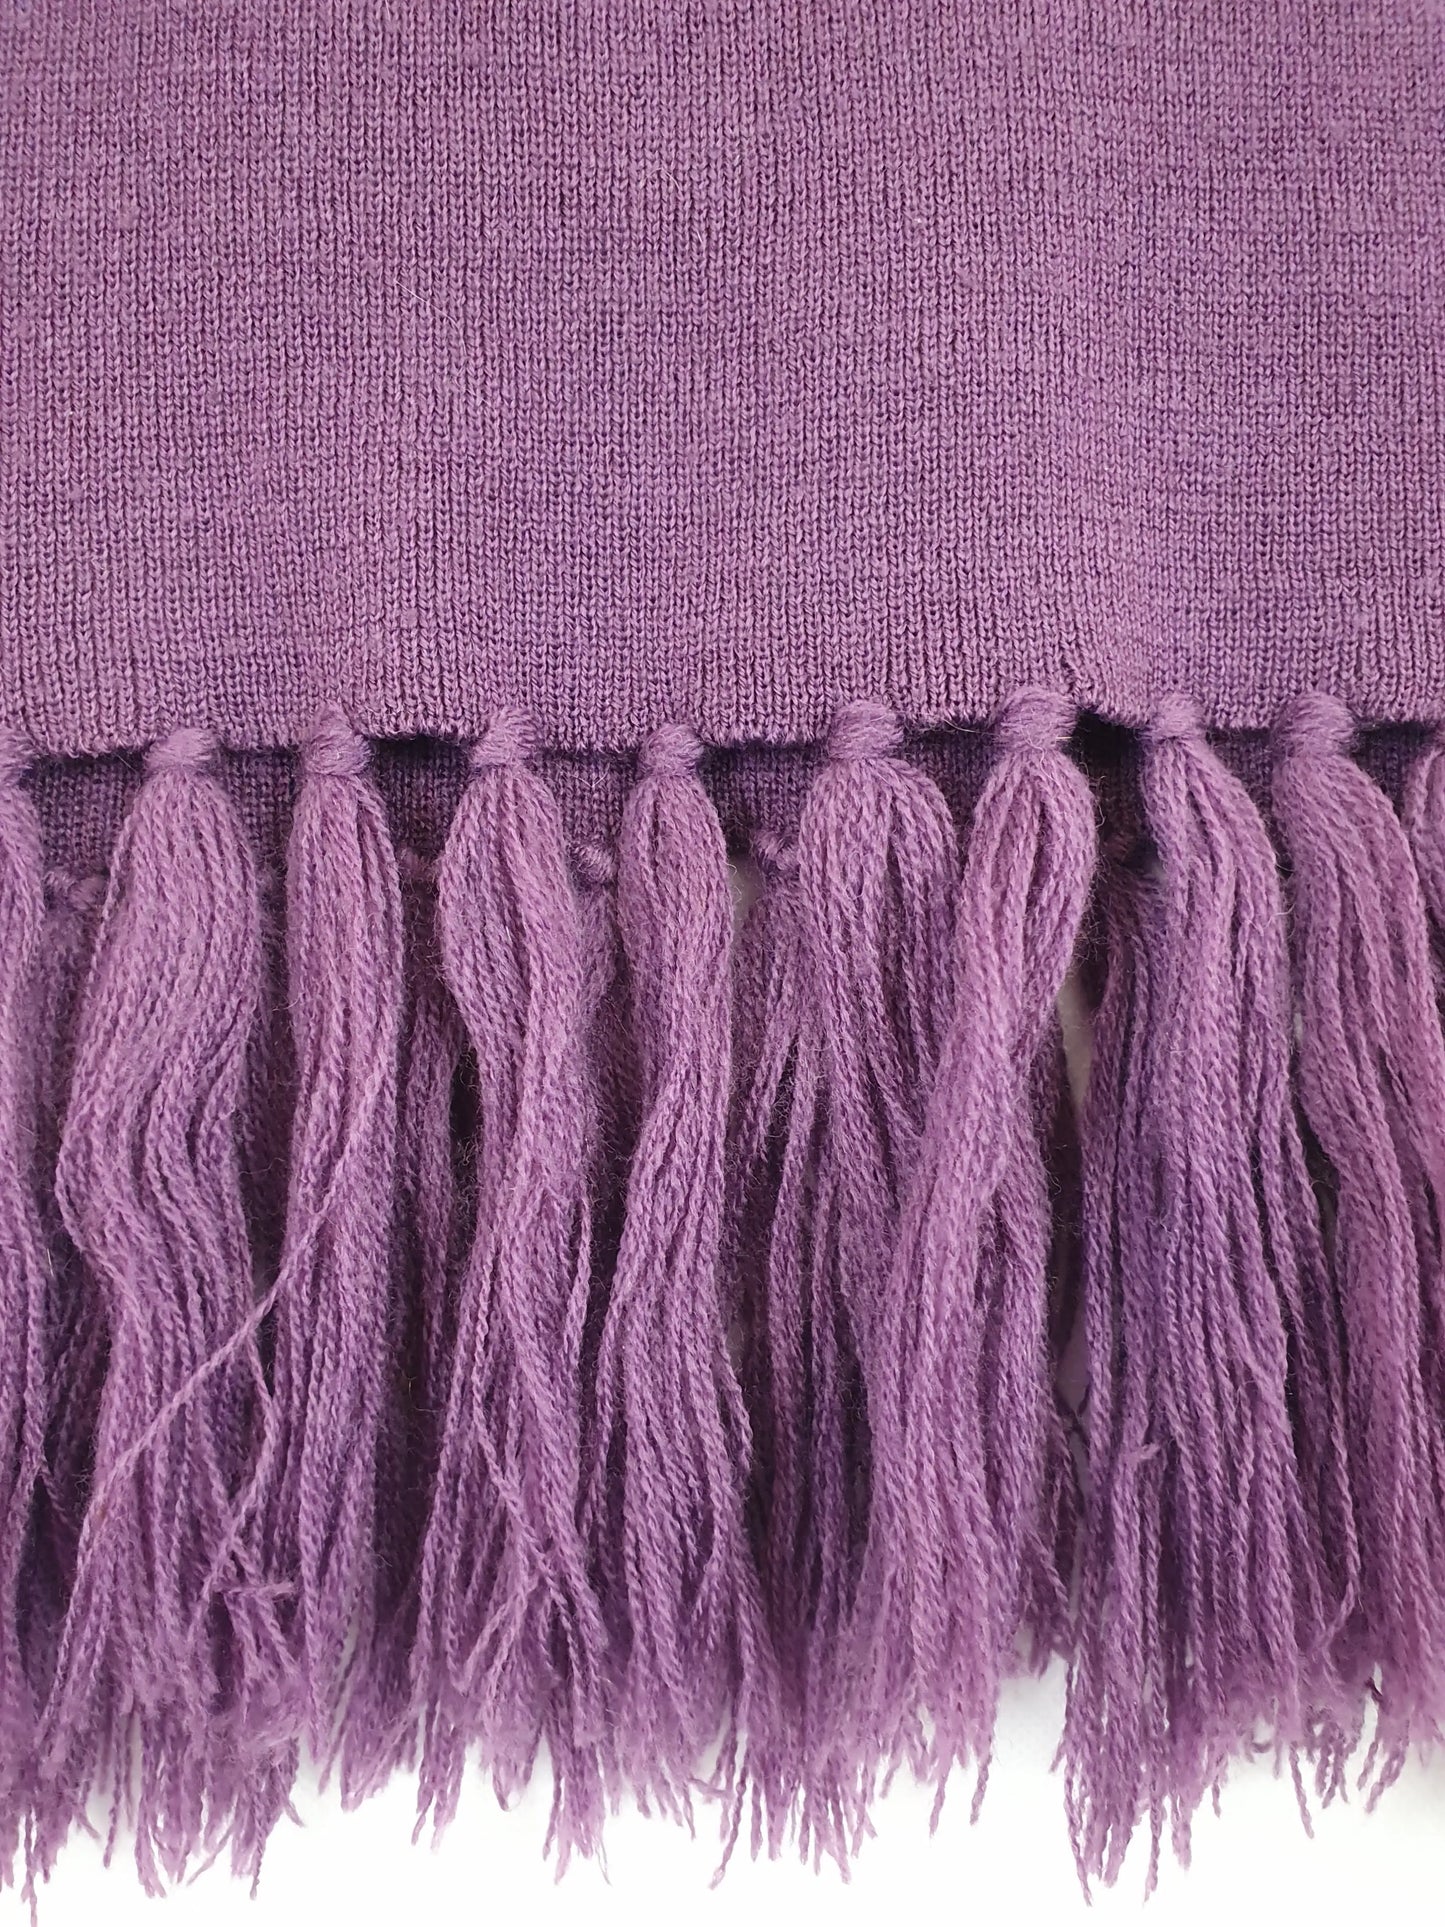 Assorted Brands Purple Frill Scarf Size OSFA by SwapUp-Online Second Hand Store-Online Thrift Store